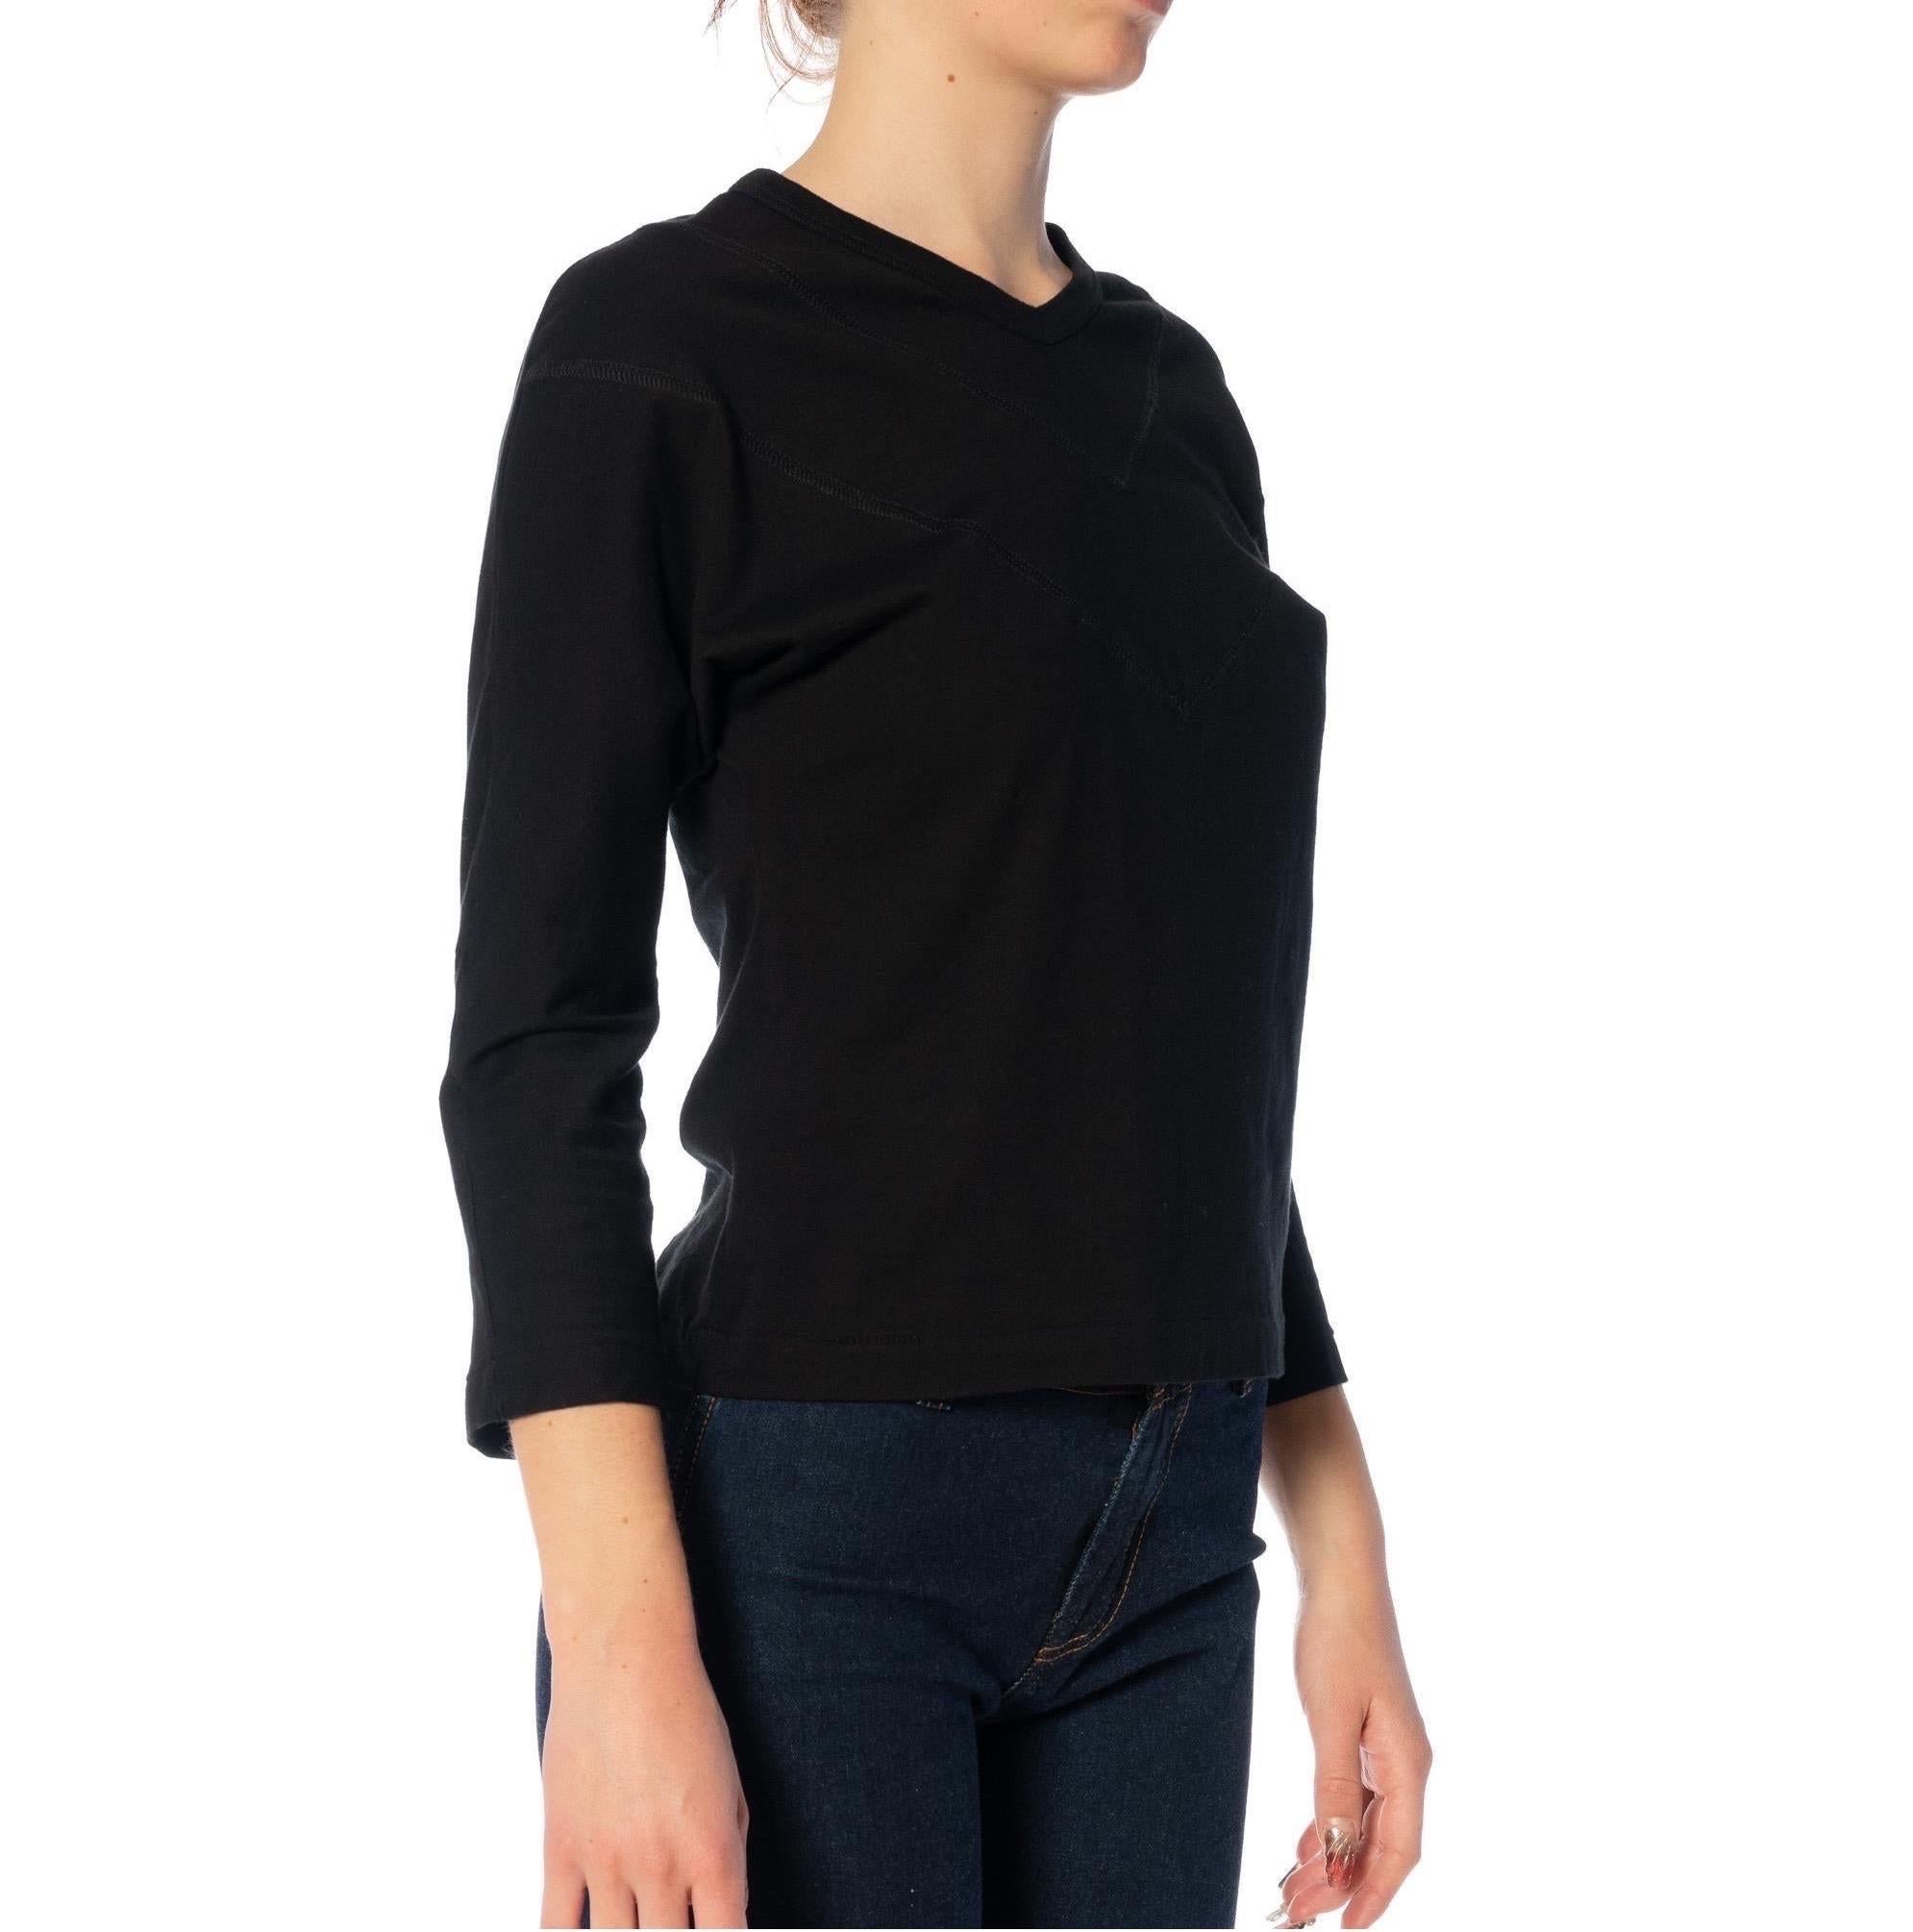 2010S COMME DES GARCONS Black Cotton Long Sleeve Shirt With Stitching Detail, 2 For Sale 4